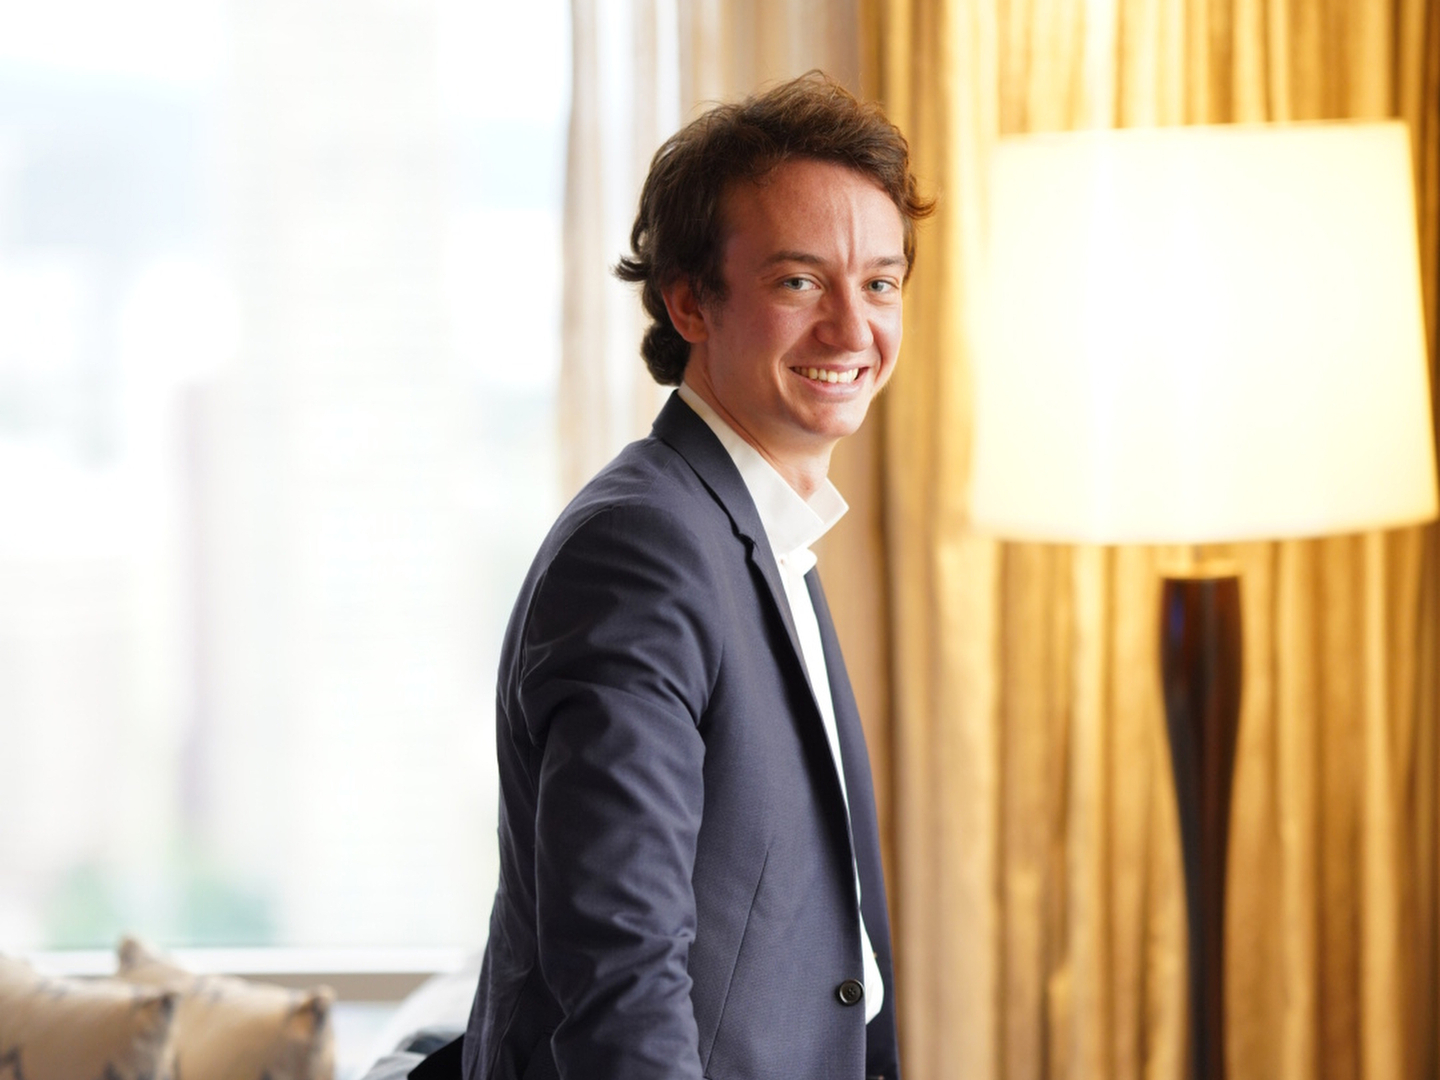 LVMH Eyes Metaverse but Focus on 'Real Products' Reveals CEO Arnault